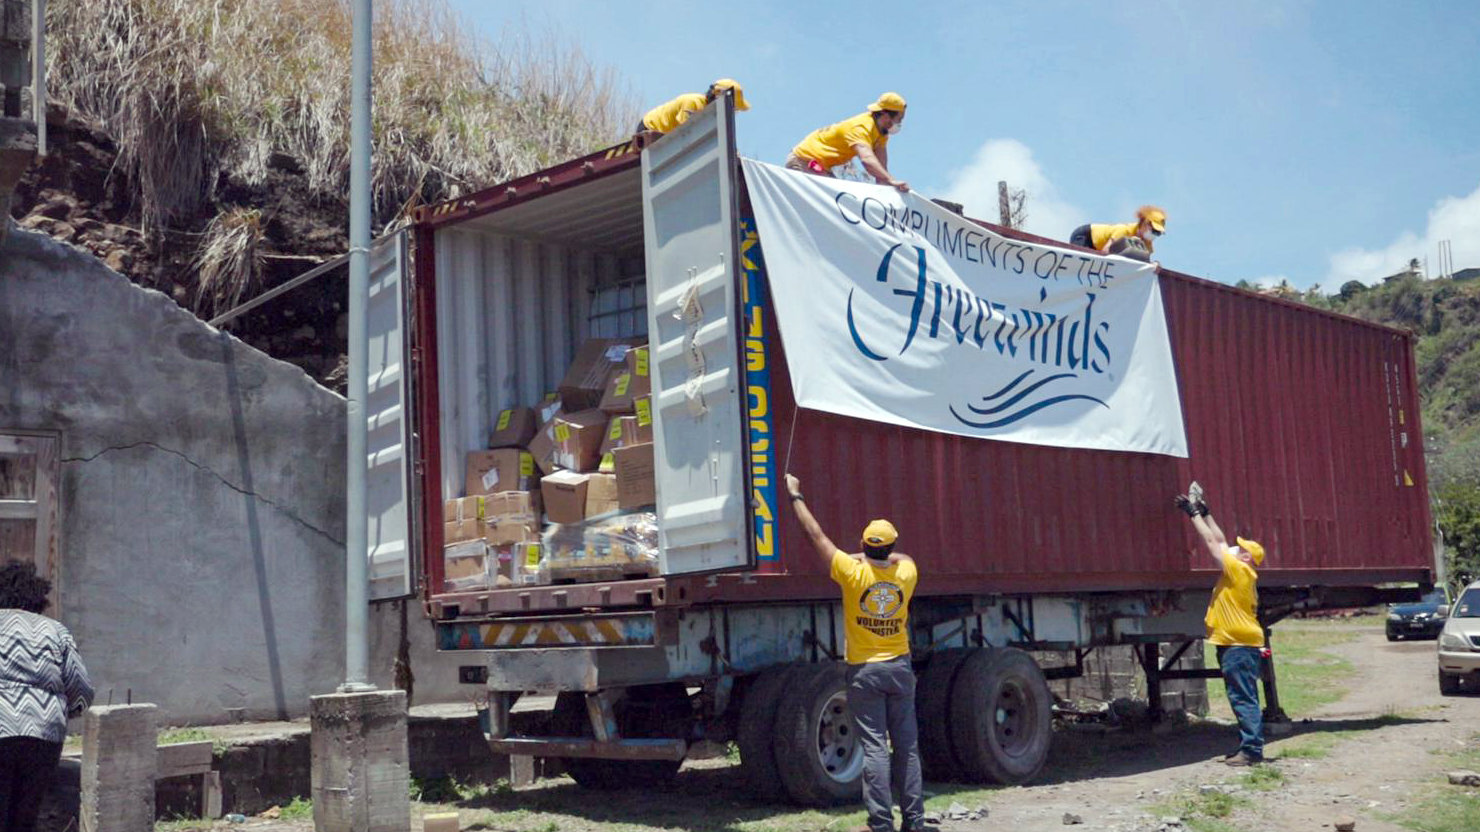 A team of VMs unload a container of vital supplies, which the
Freewinds sent to the island with the support of the IAS.